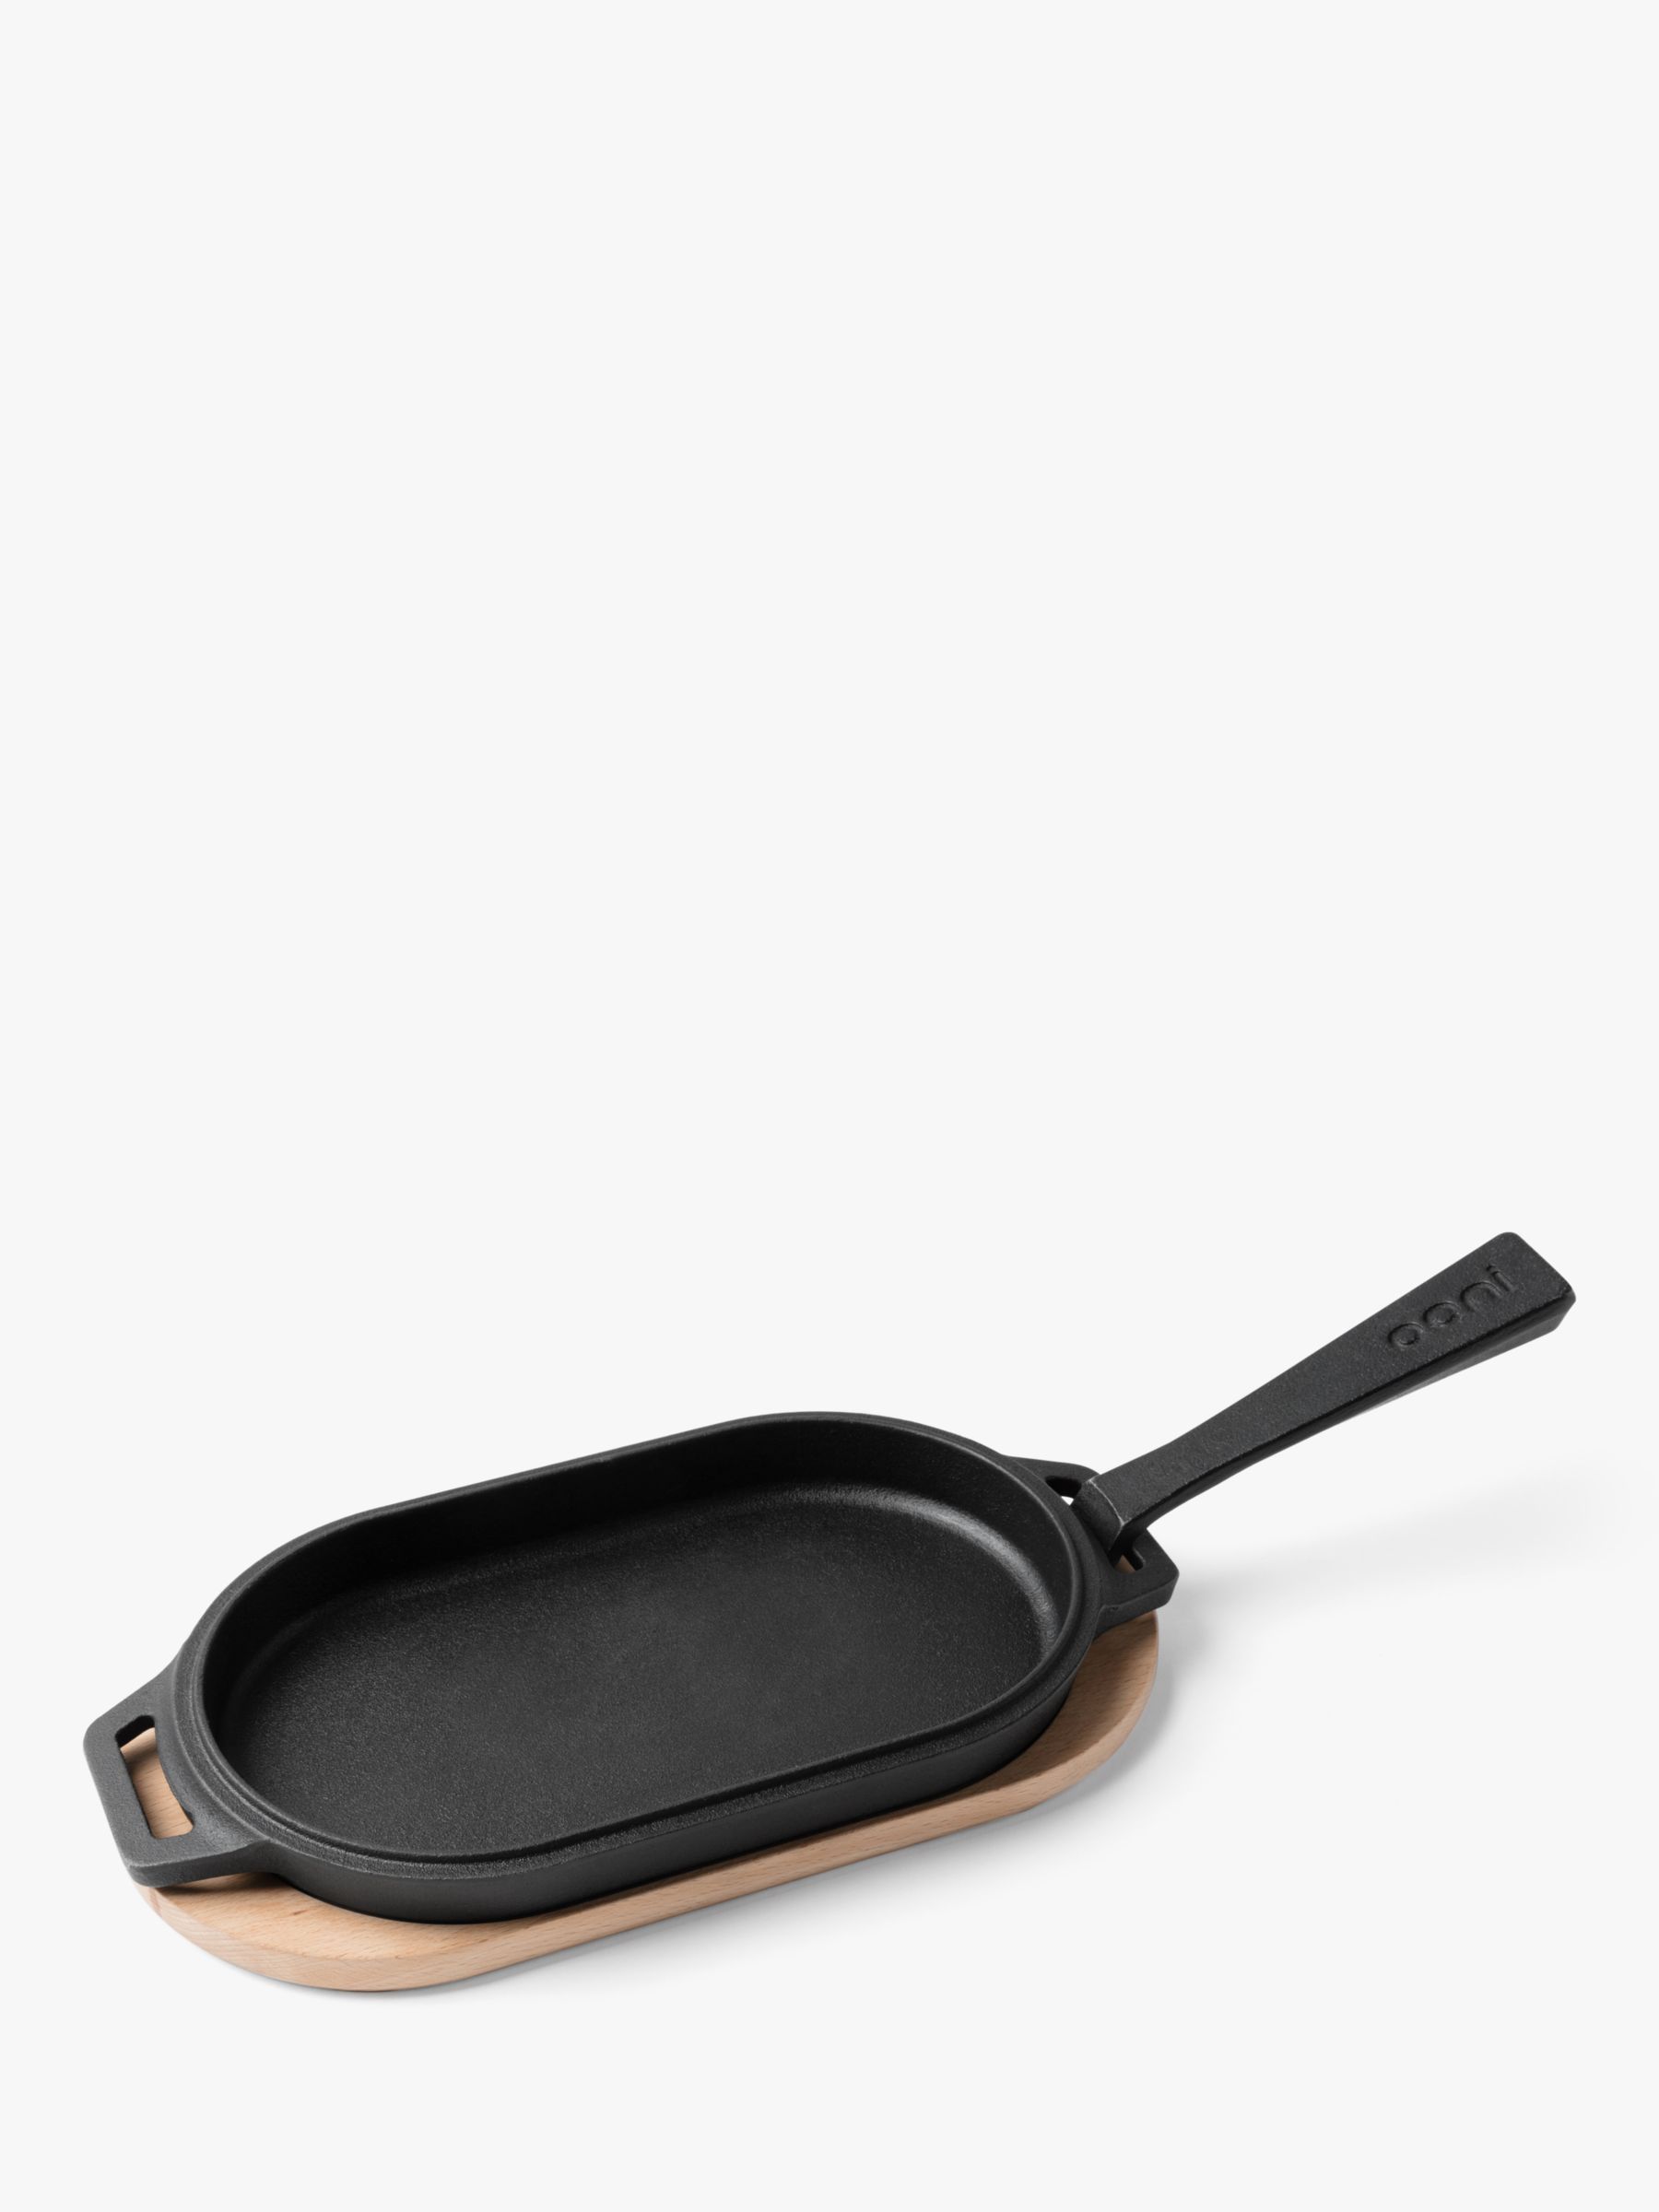 Photo of Ooni outdoor oven sizzler pan